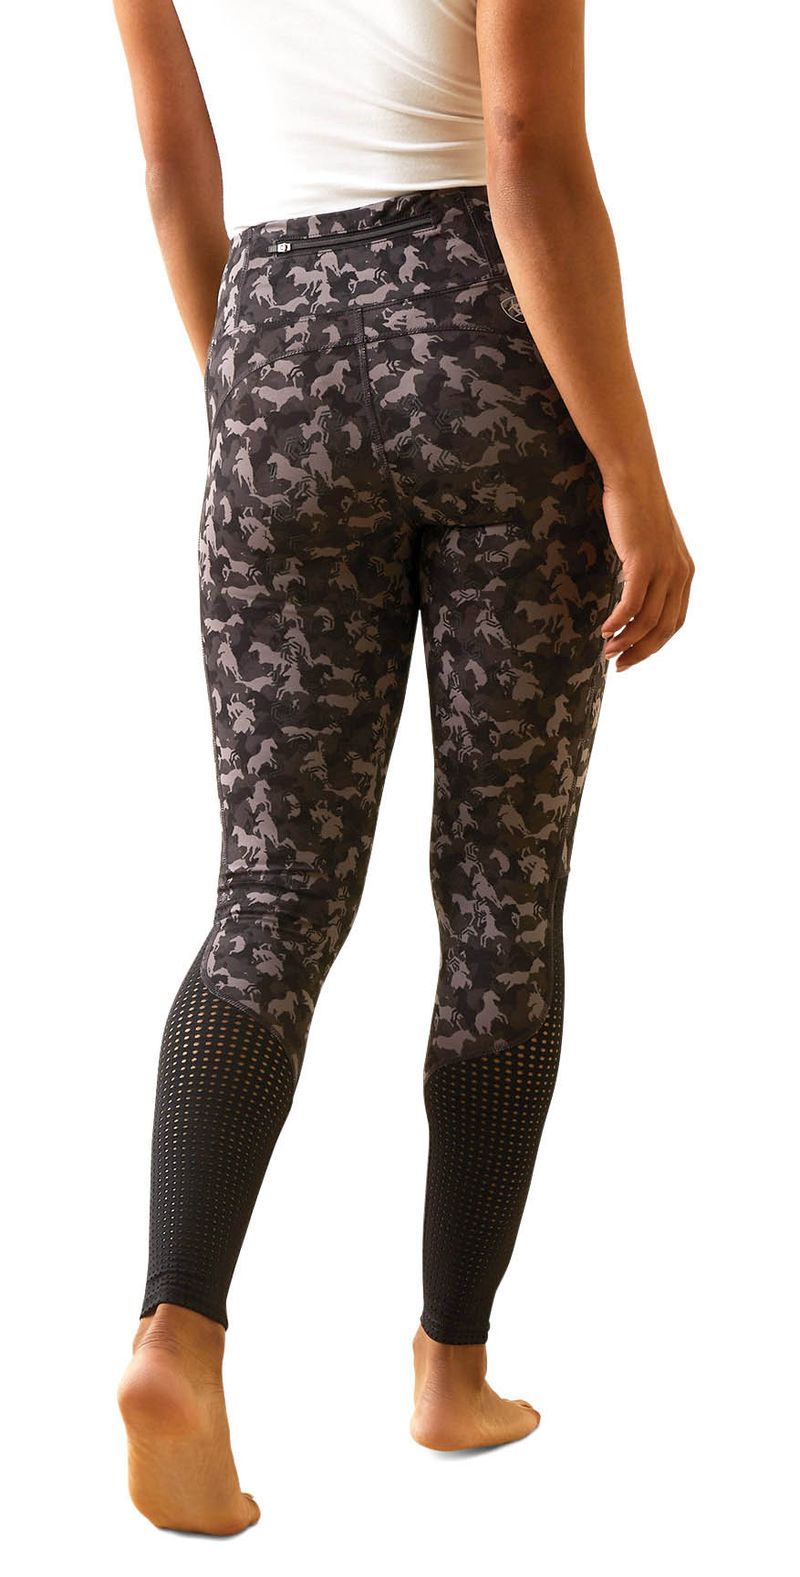 Eos Print Full Seat Tight  Breeches, Clothes for women, Riding tights